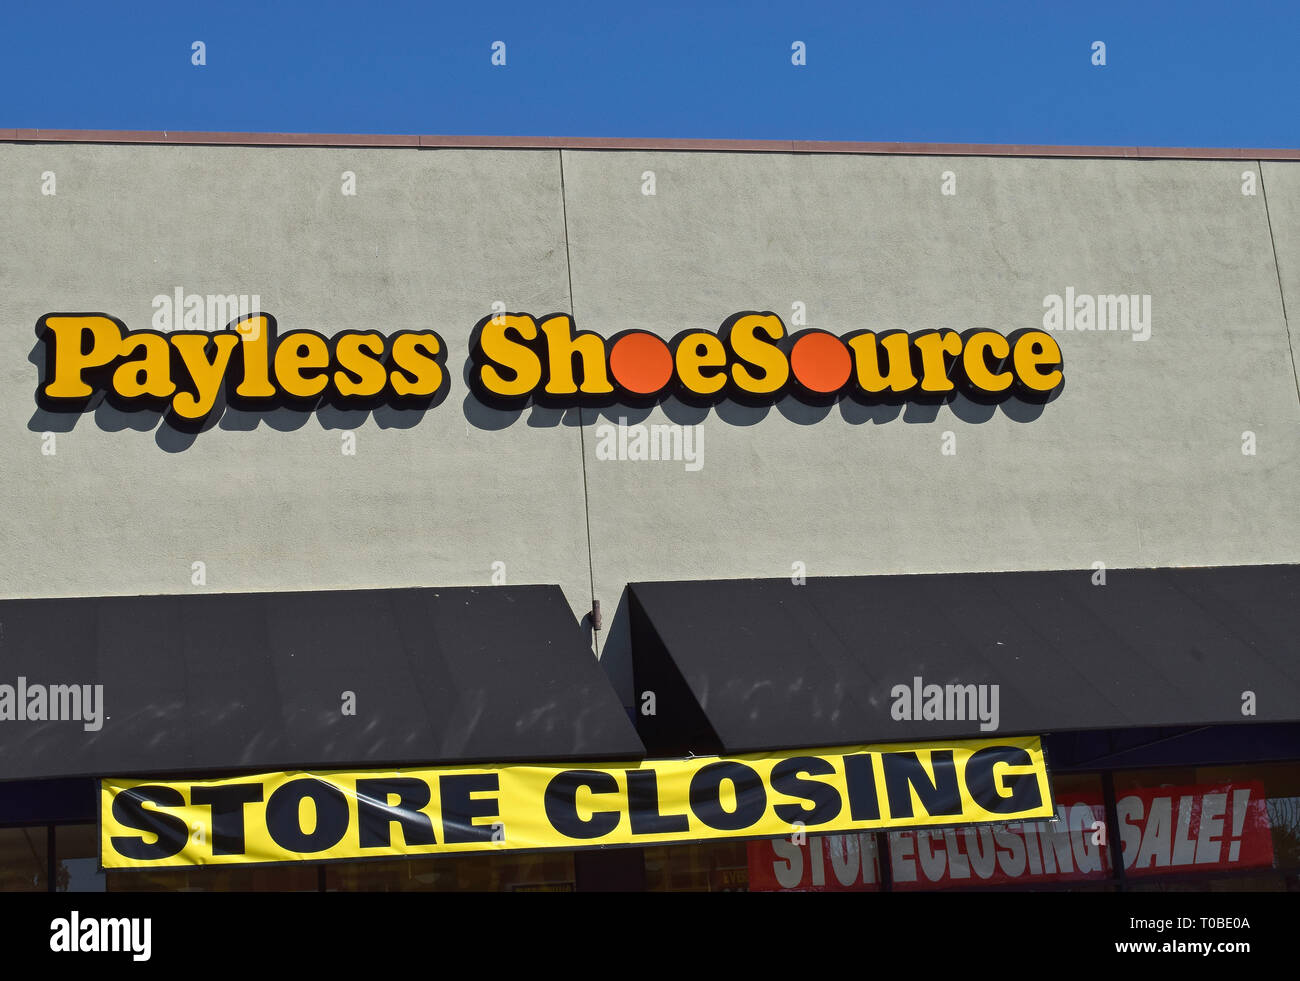 Payless ShoeSource store closing sign in California Stock Photo - Alamy